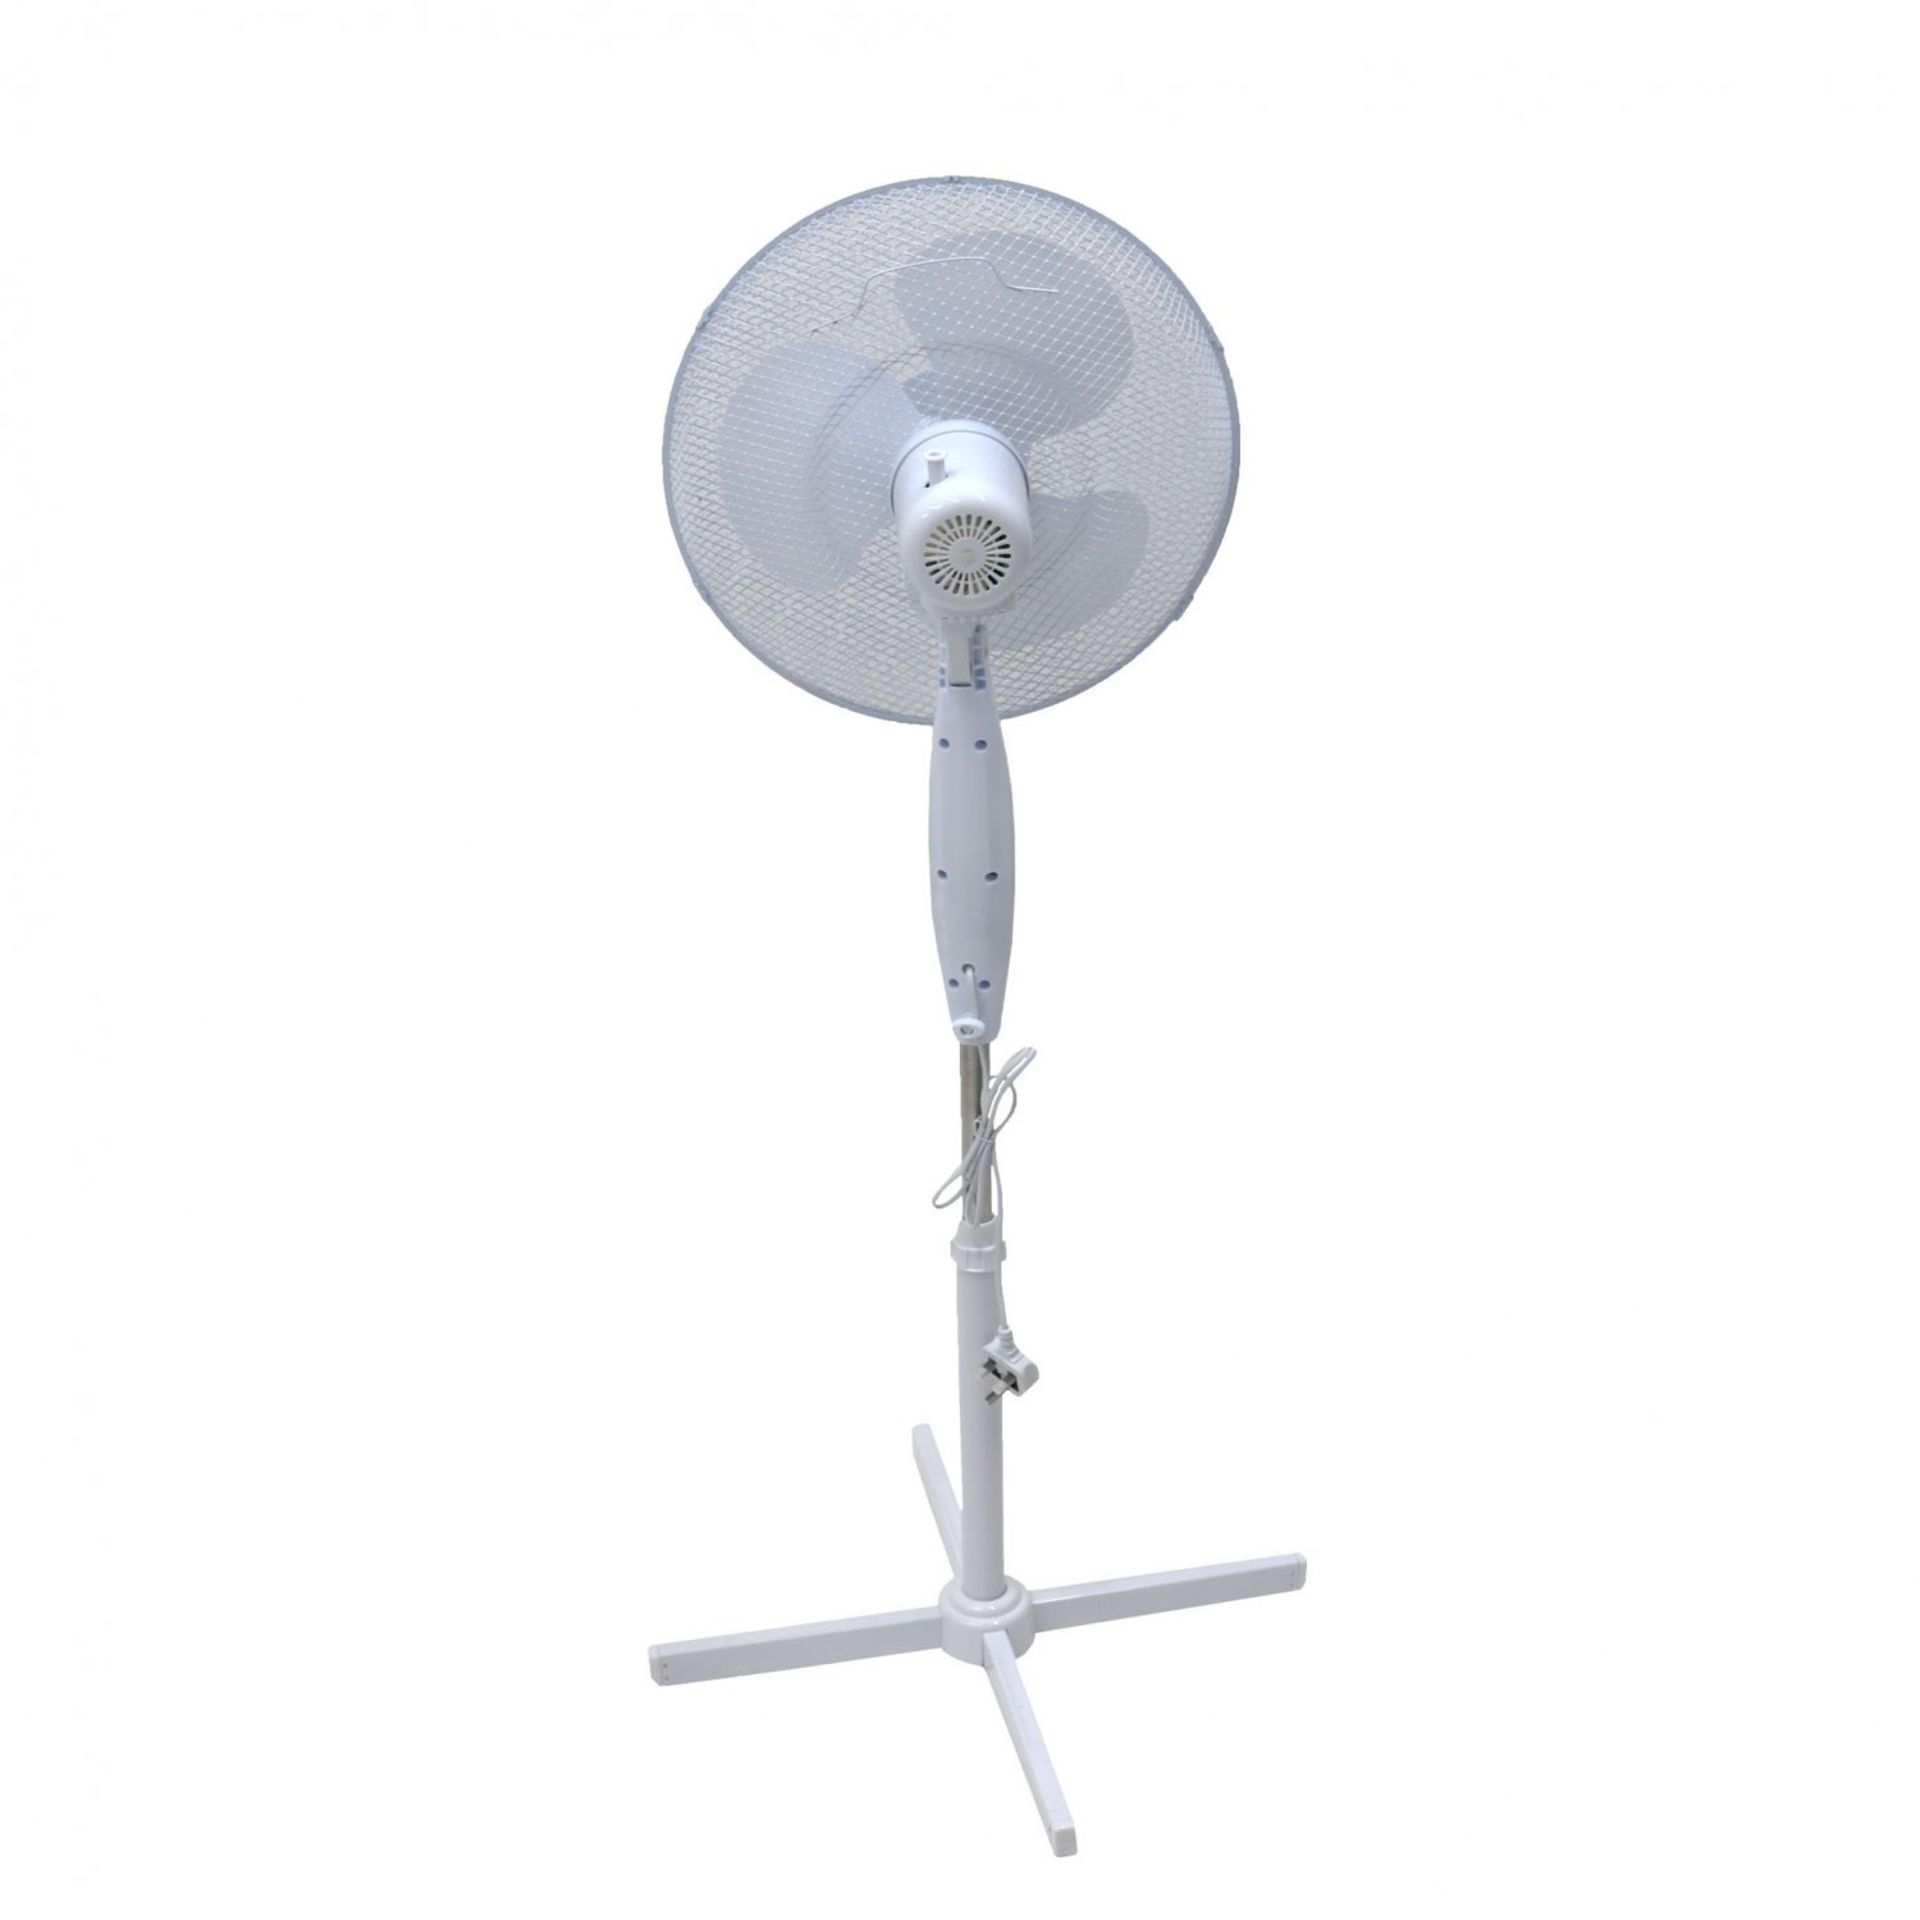 (ZP30) 16" Oscillating Pedestal Electric Fan The fan head oscillates and tilts which me... - Image 2 of 2